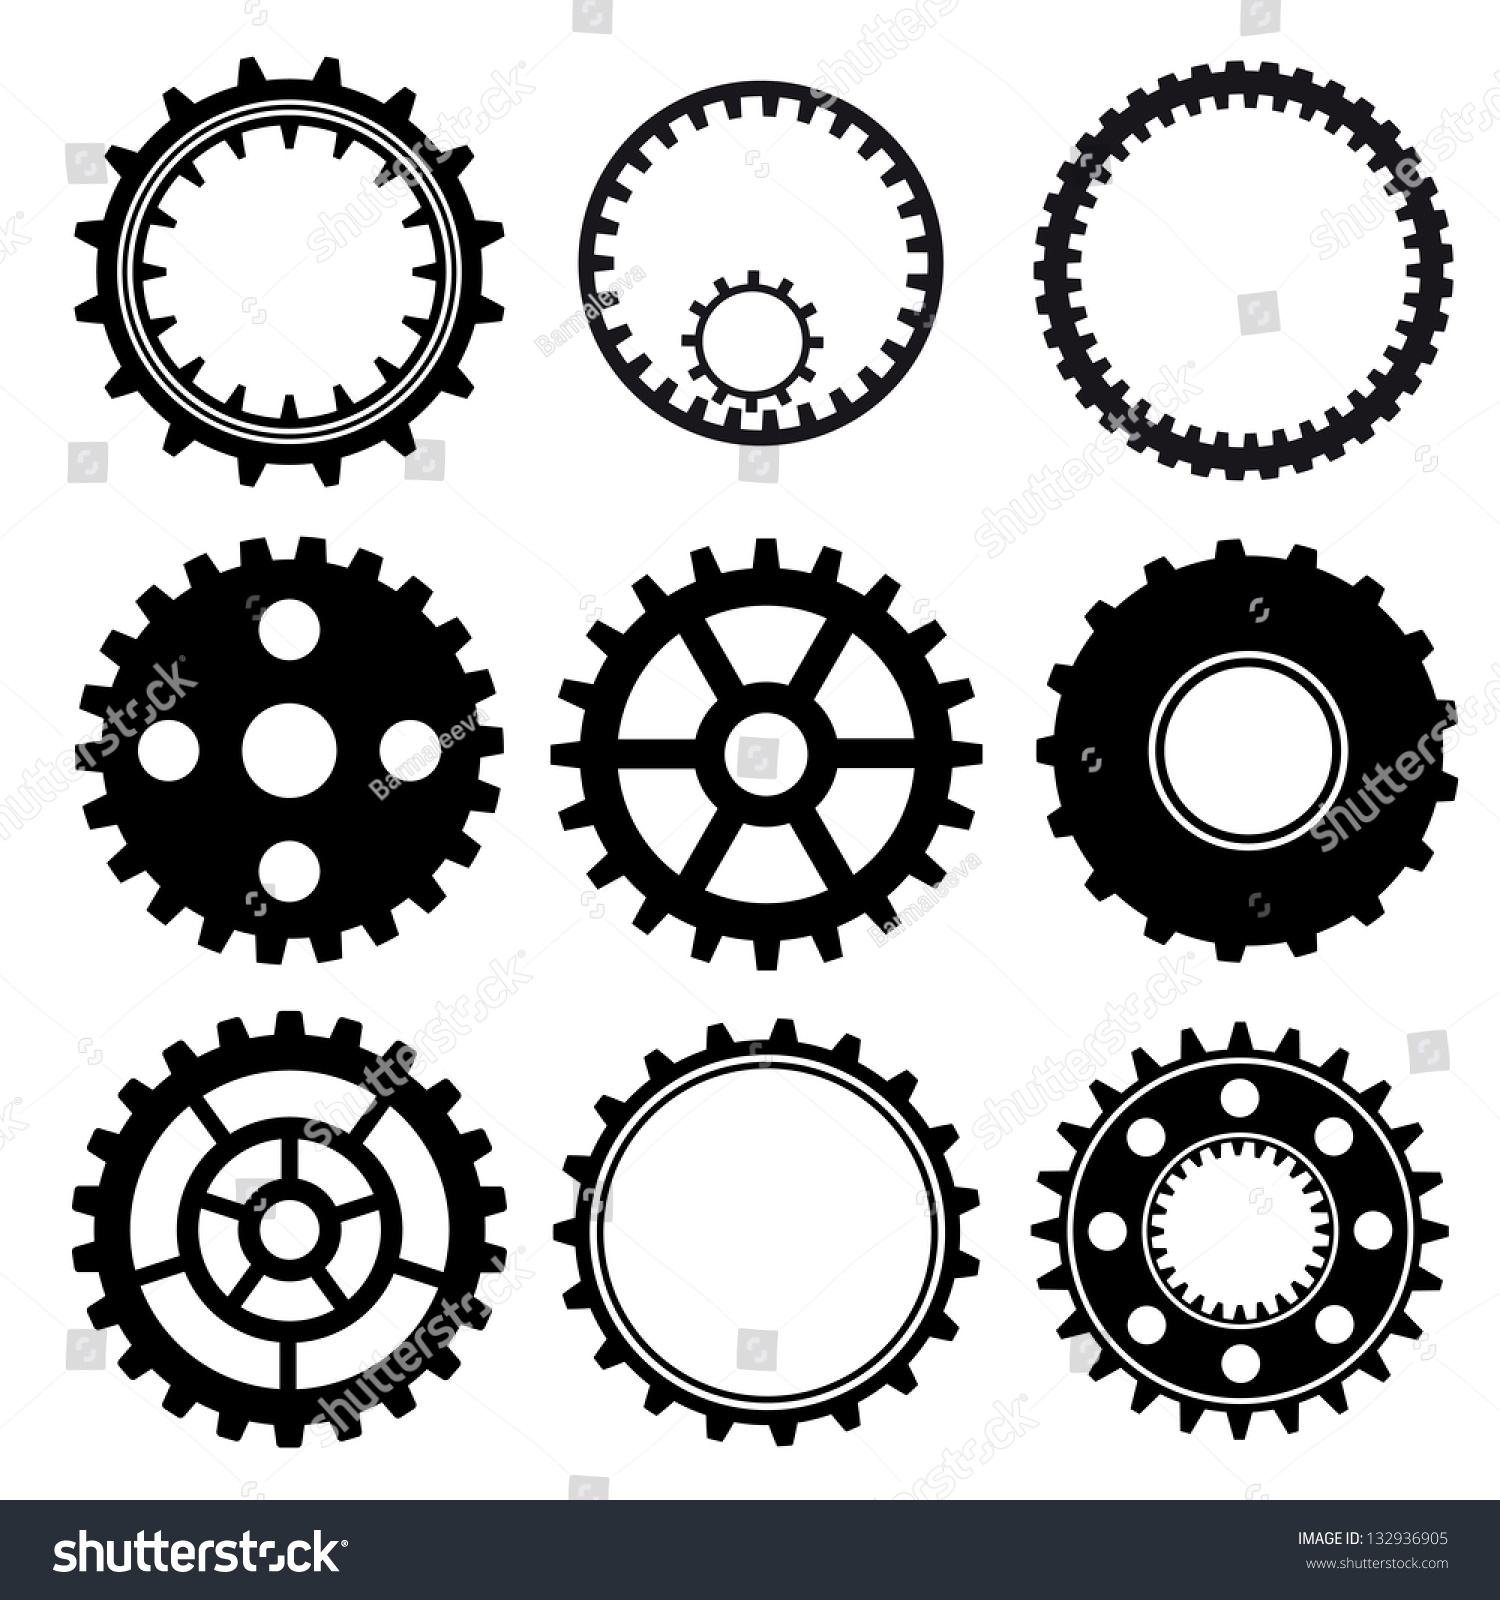 industrial clipart free download - photo #25